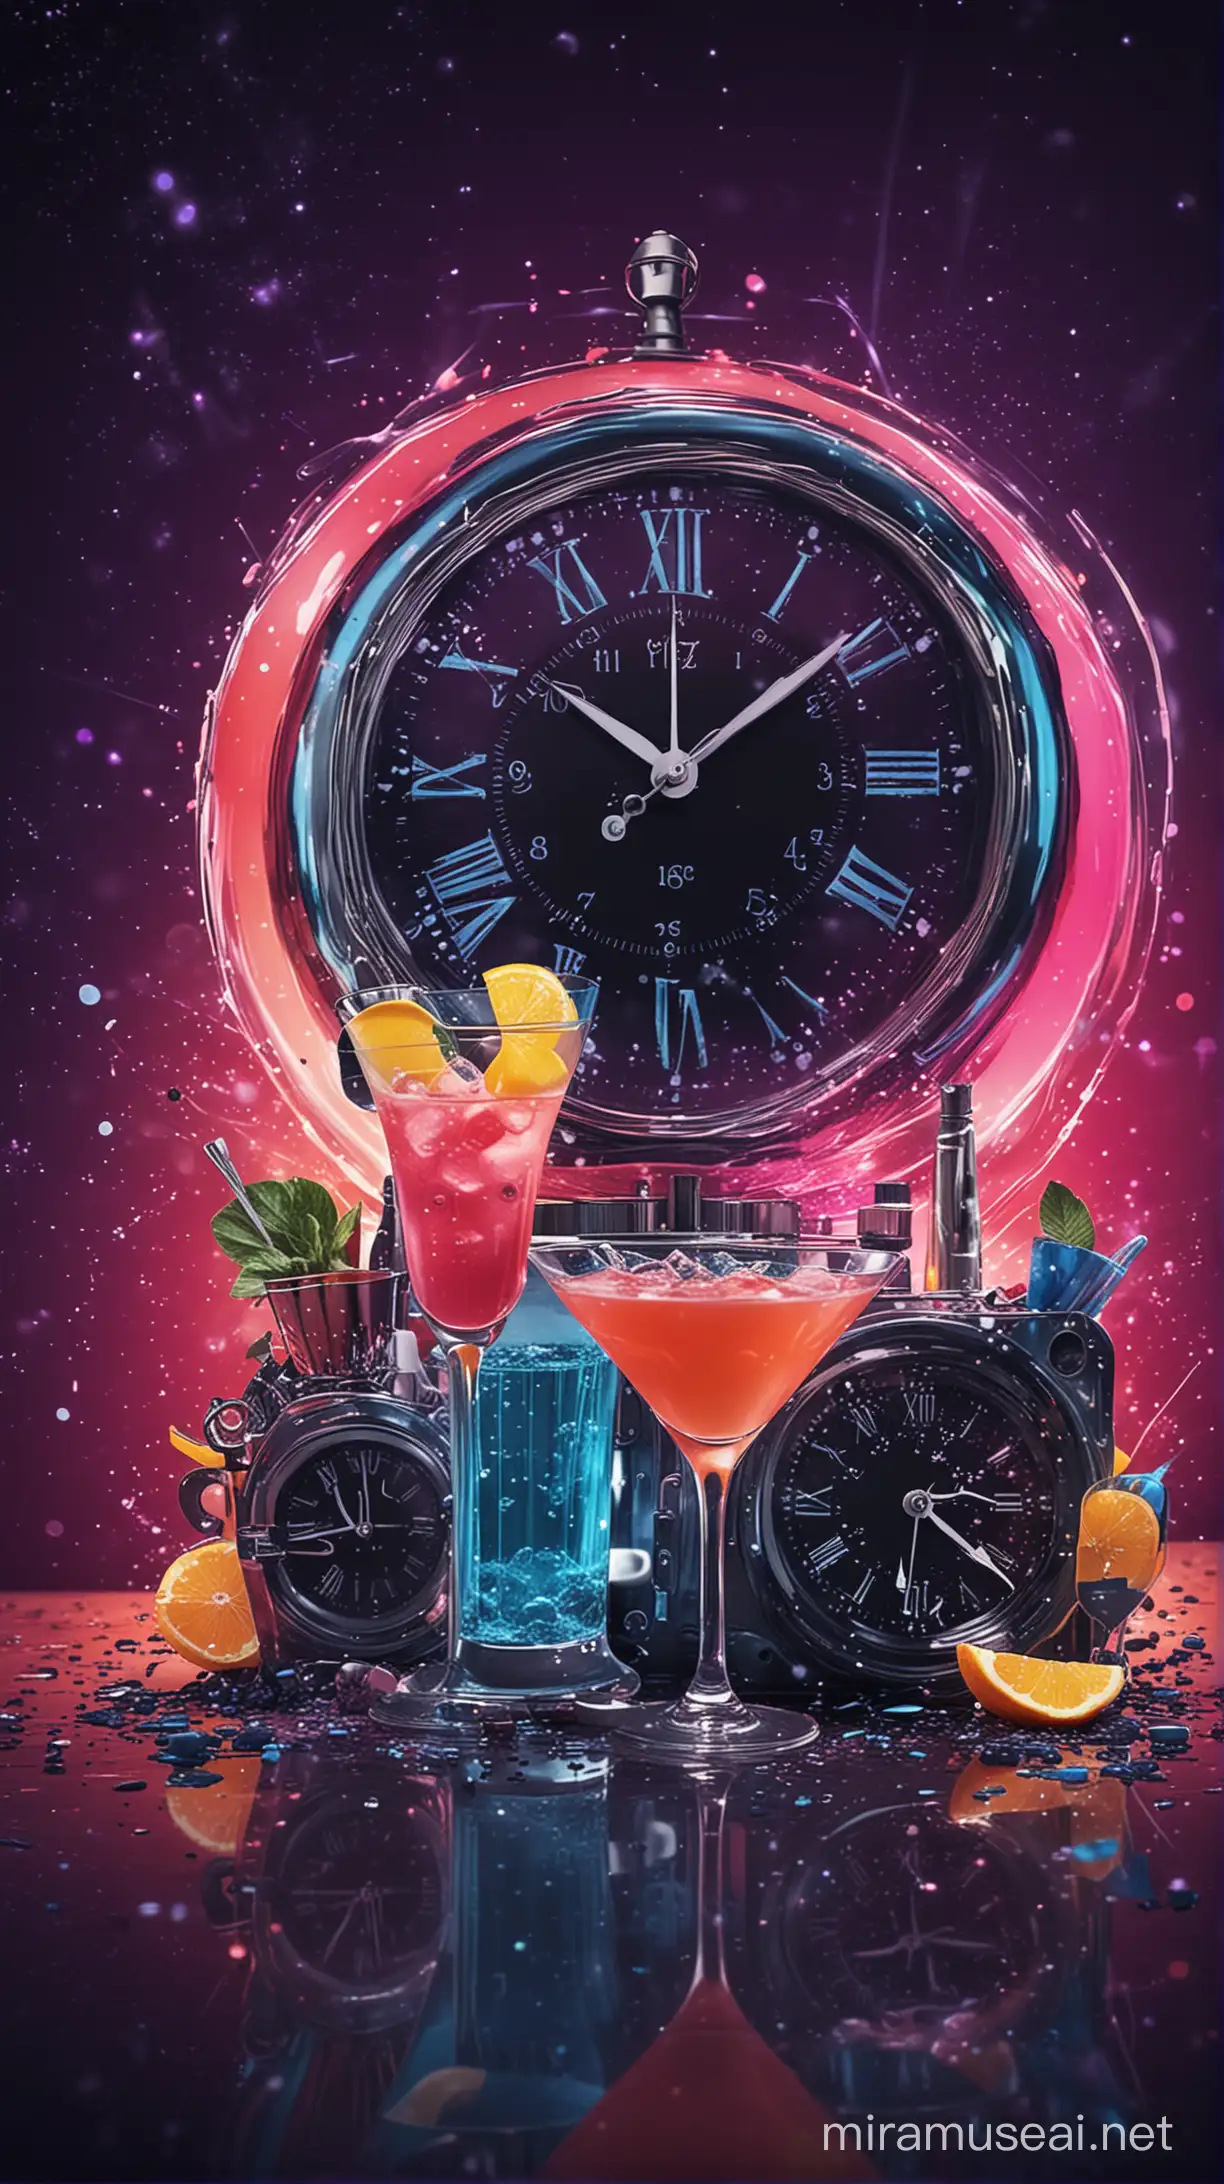 Disco Night Party Invite Smashed Cocktails and Ticking Clock on Funky Background